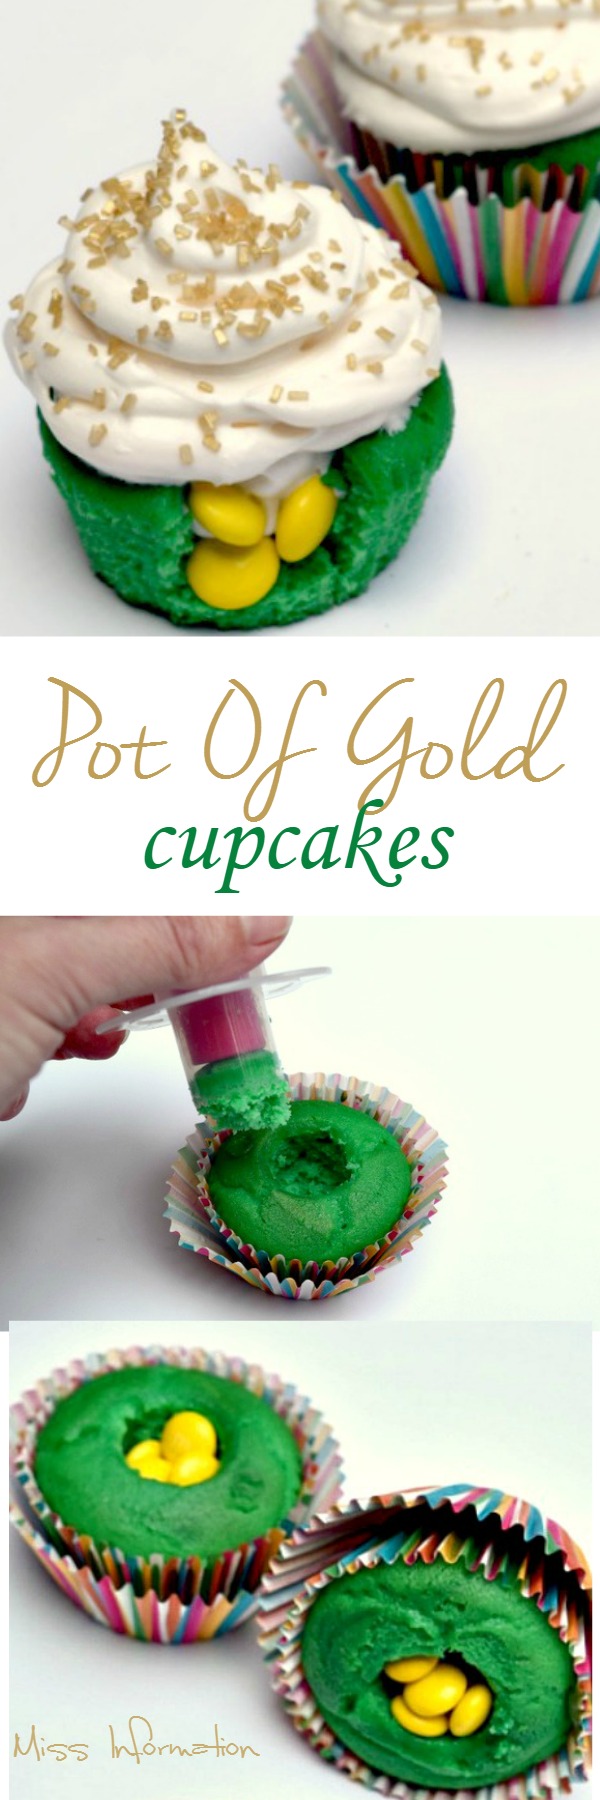 Smartie pot of gold cupcakes